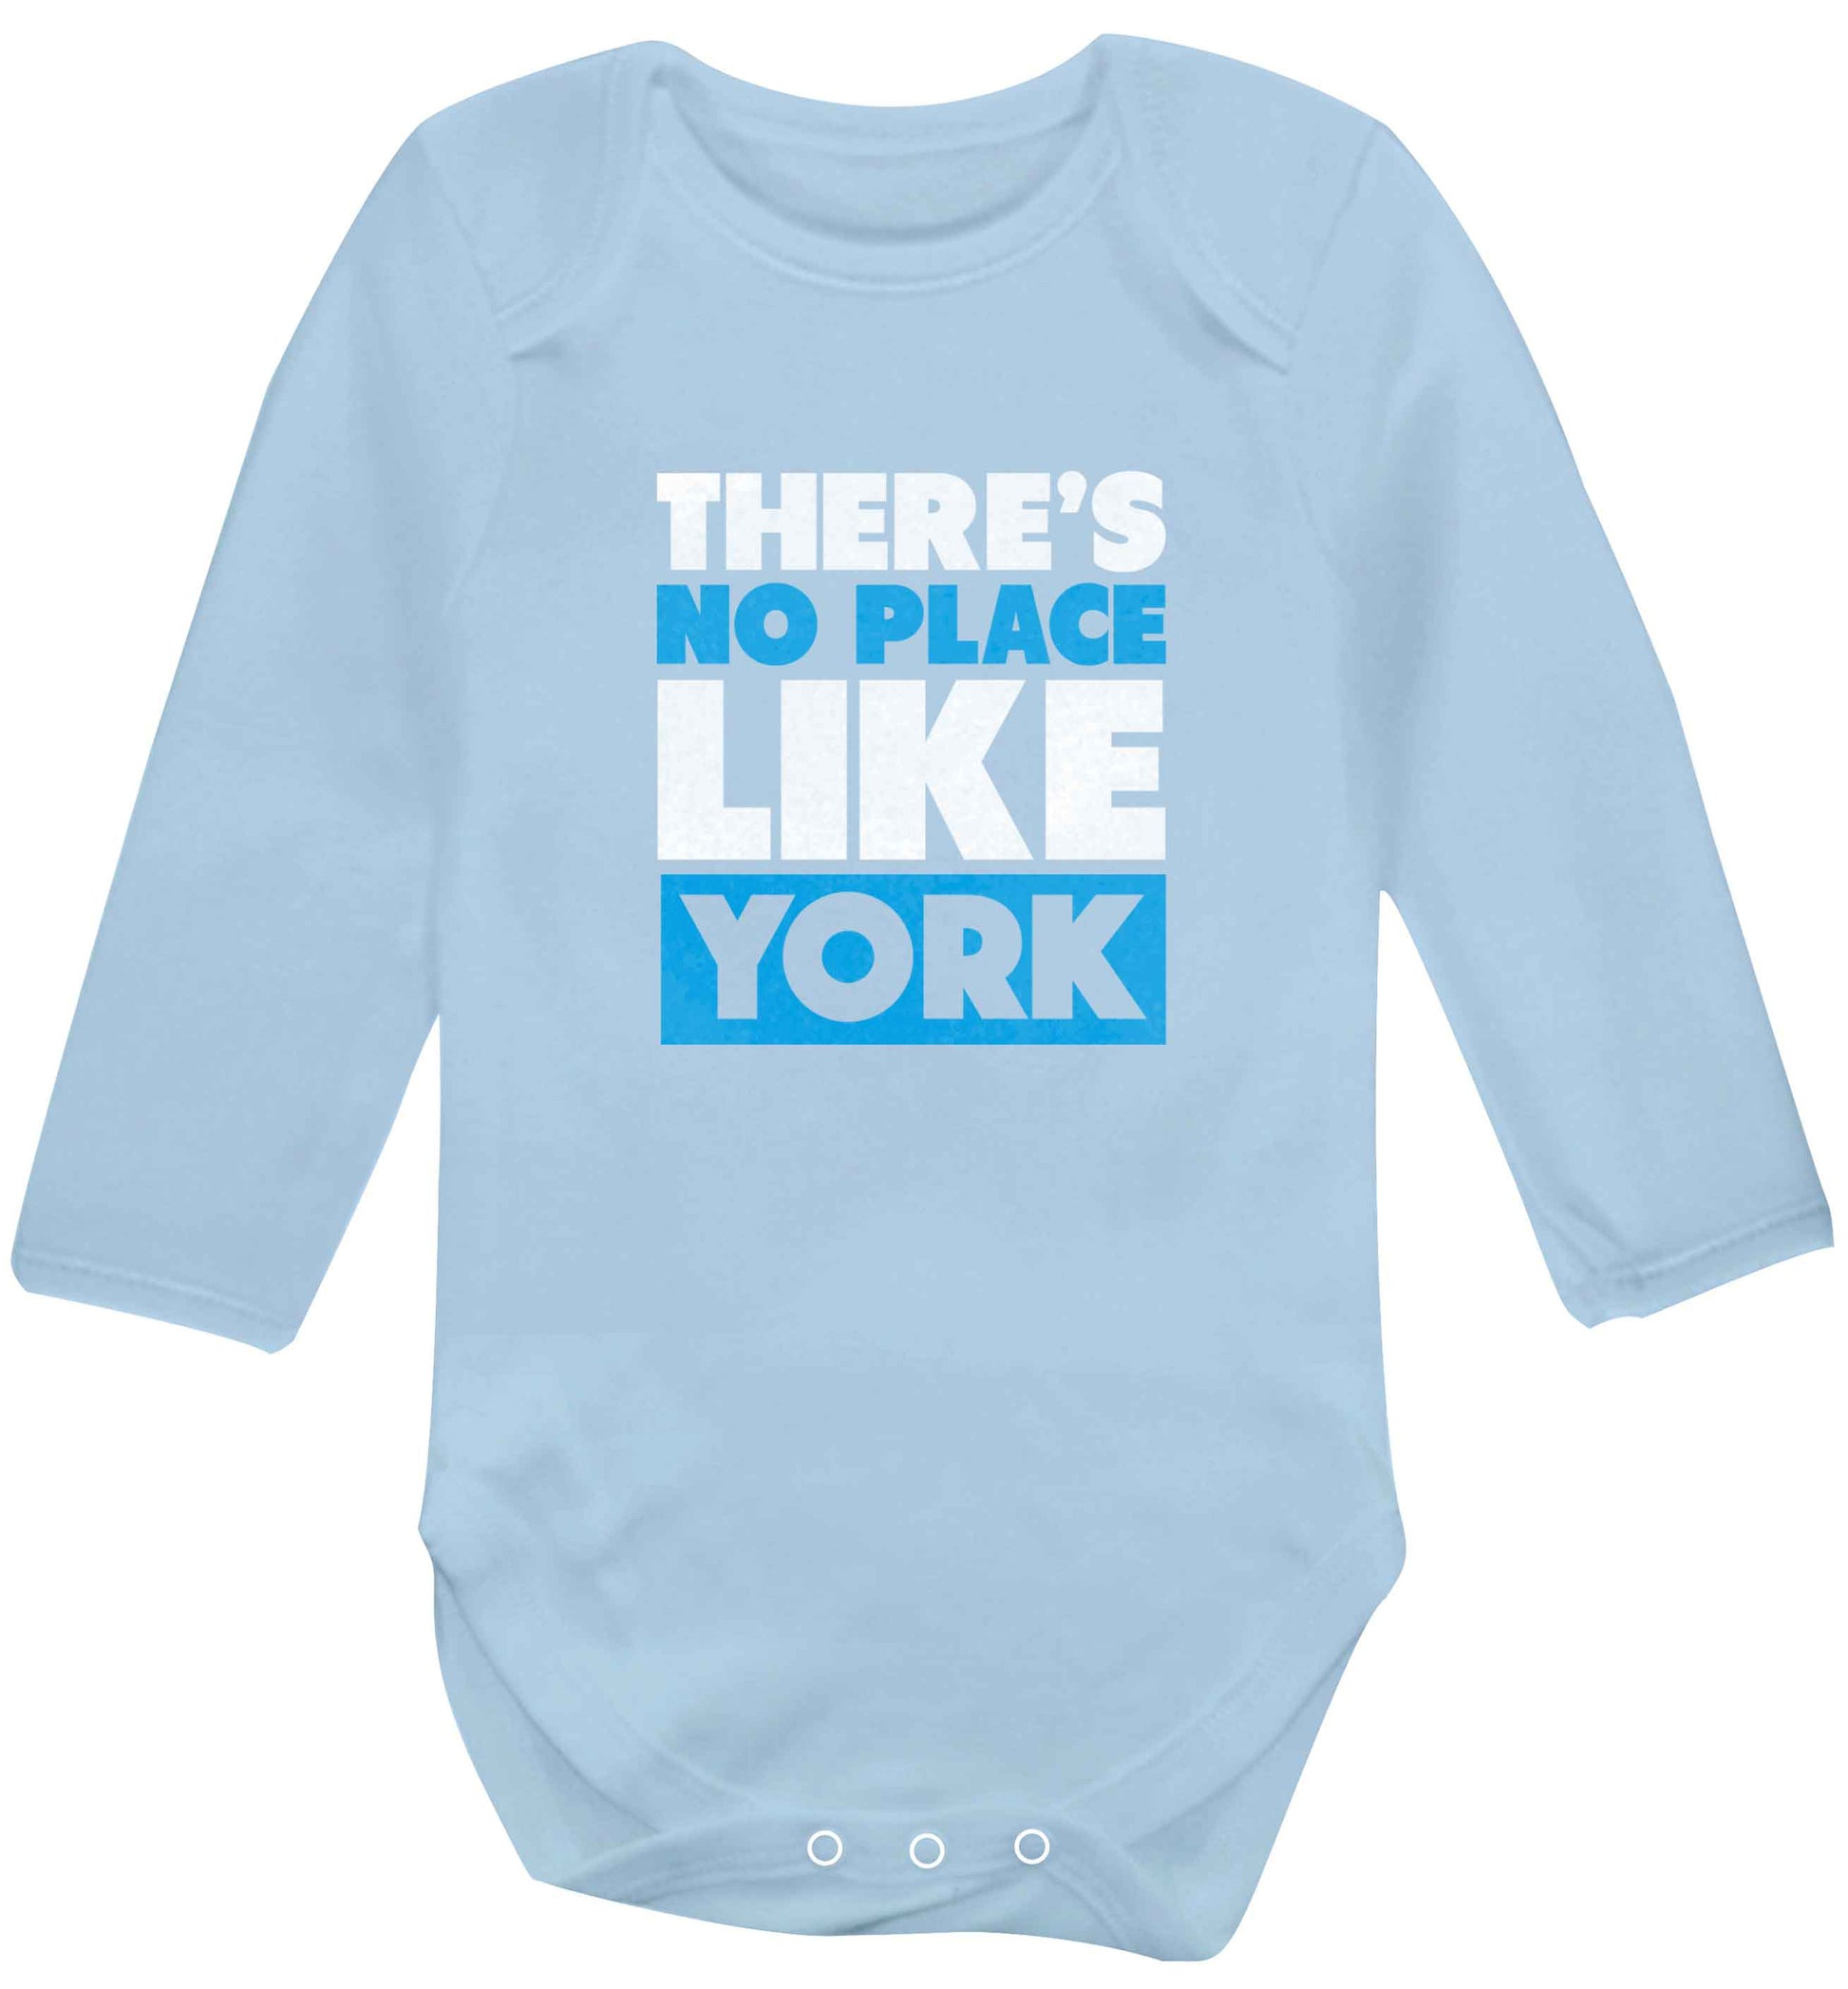 There's no place like york baby vest long sleeved pale blue 6-12 months